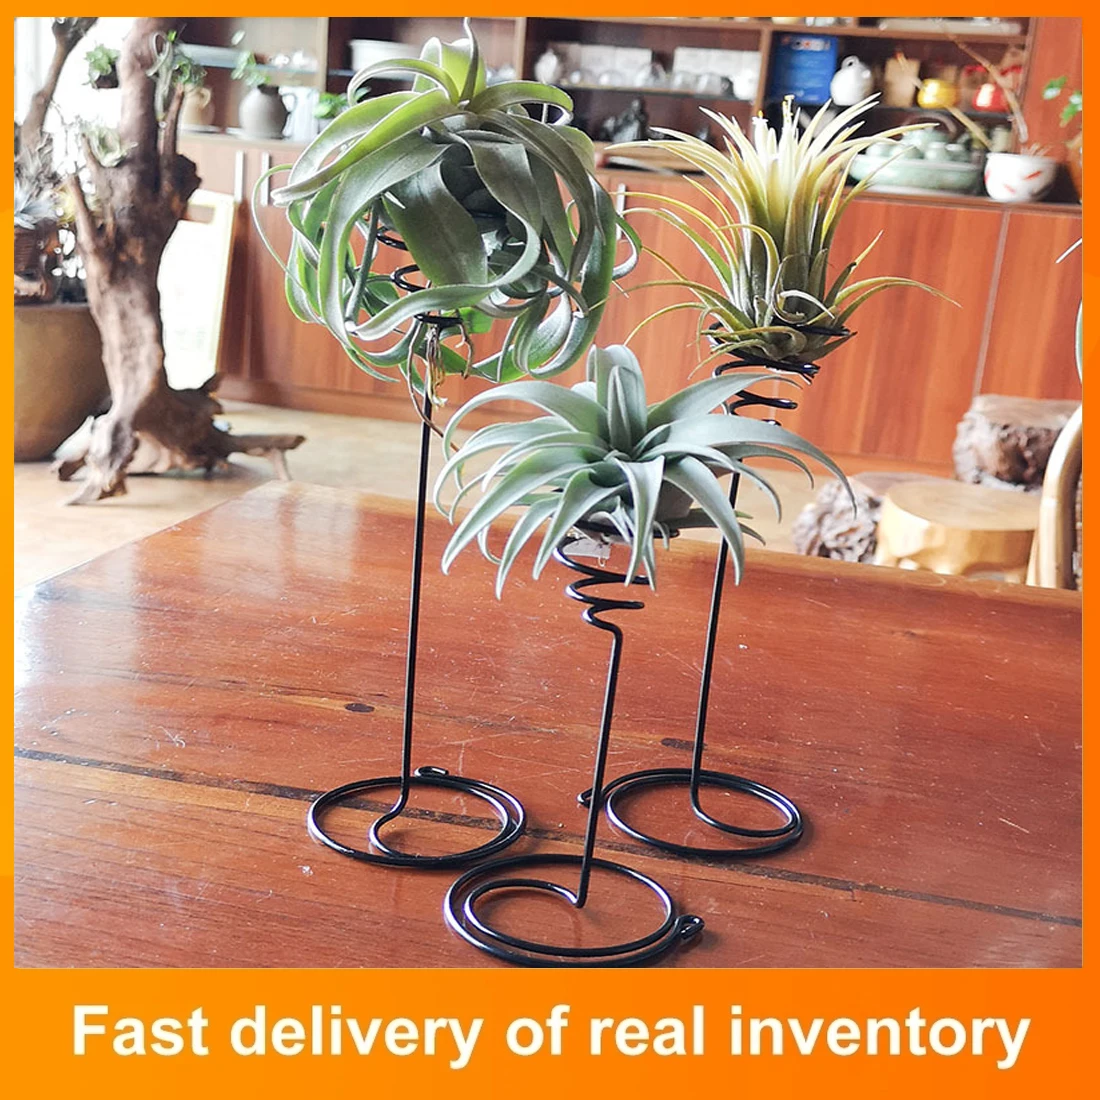 3 Sizes Air Plants Container Air Plant Holder Iron Flower Stand For Displaying Home Office Desktop Decoration